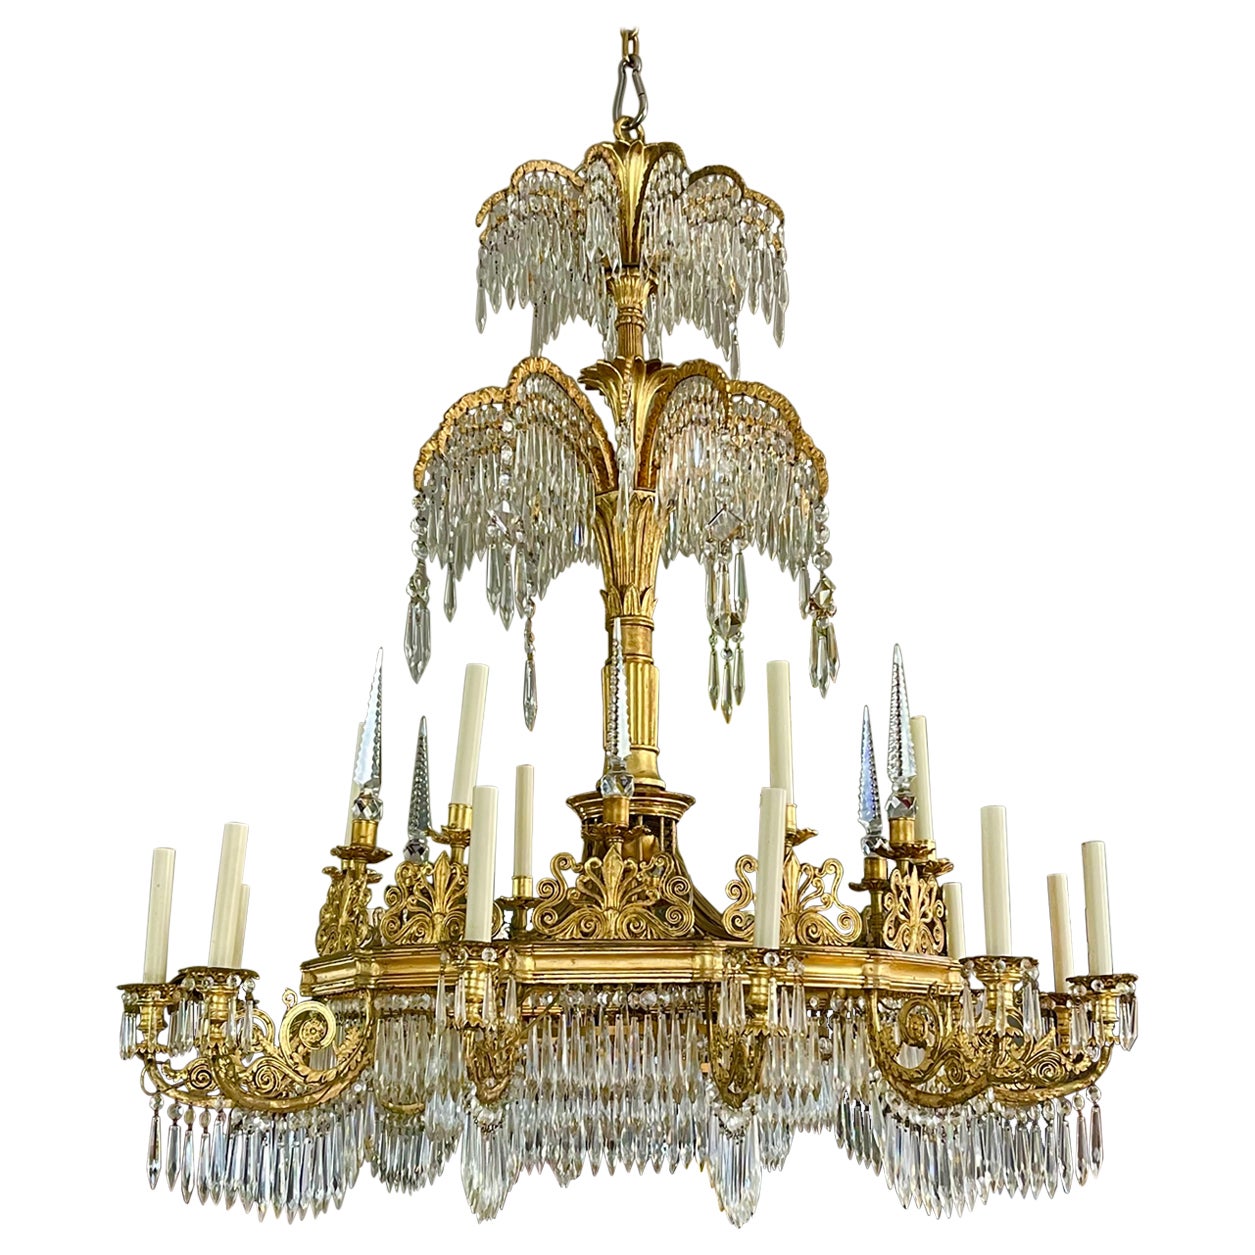 Monumental Neo-Classical 18 Arm Chandelier, circa 1825, Designed by Schinkel For Sale